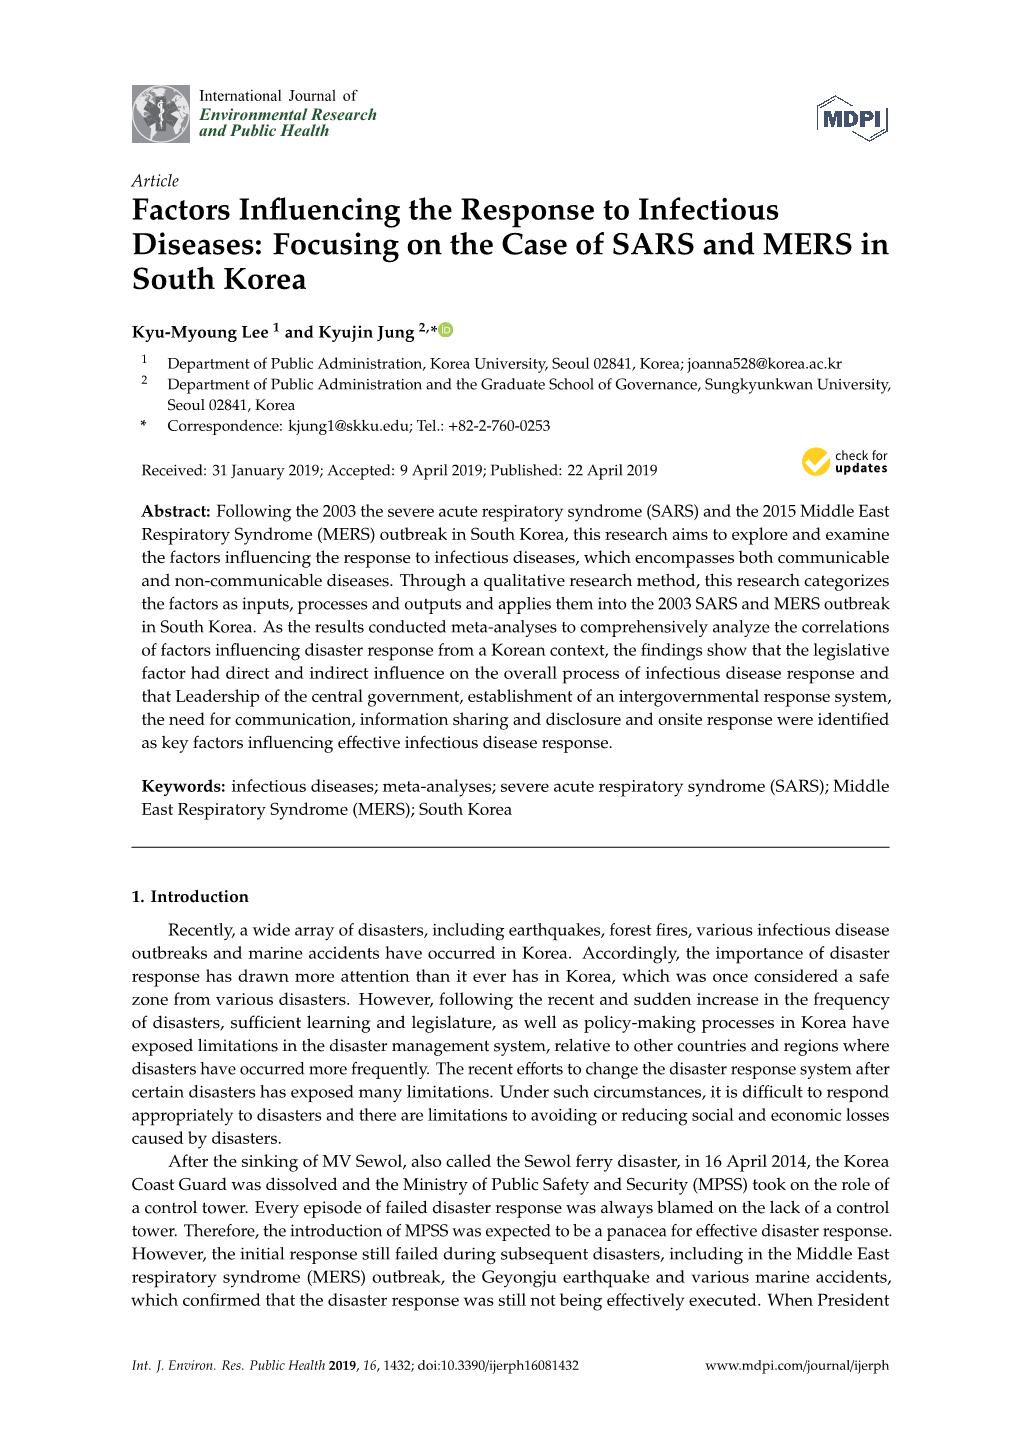 Factors Influencing the Response to Infectious Diseases: Focusing on the Case of SARS and MERS in South Korea